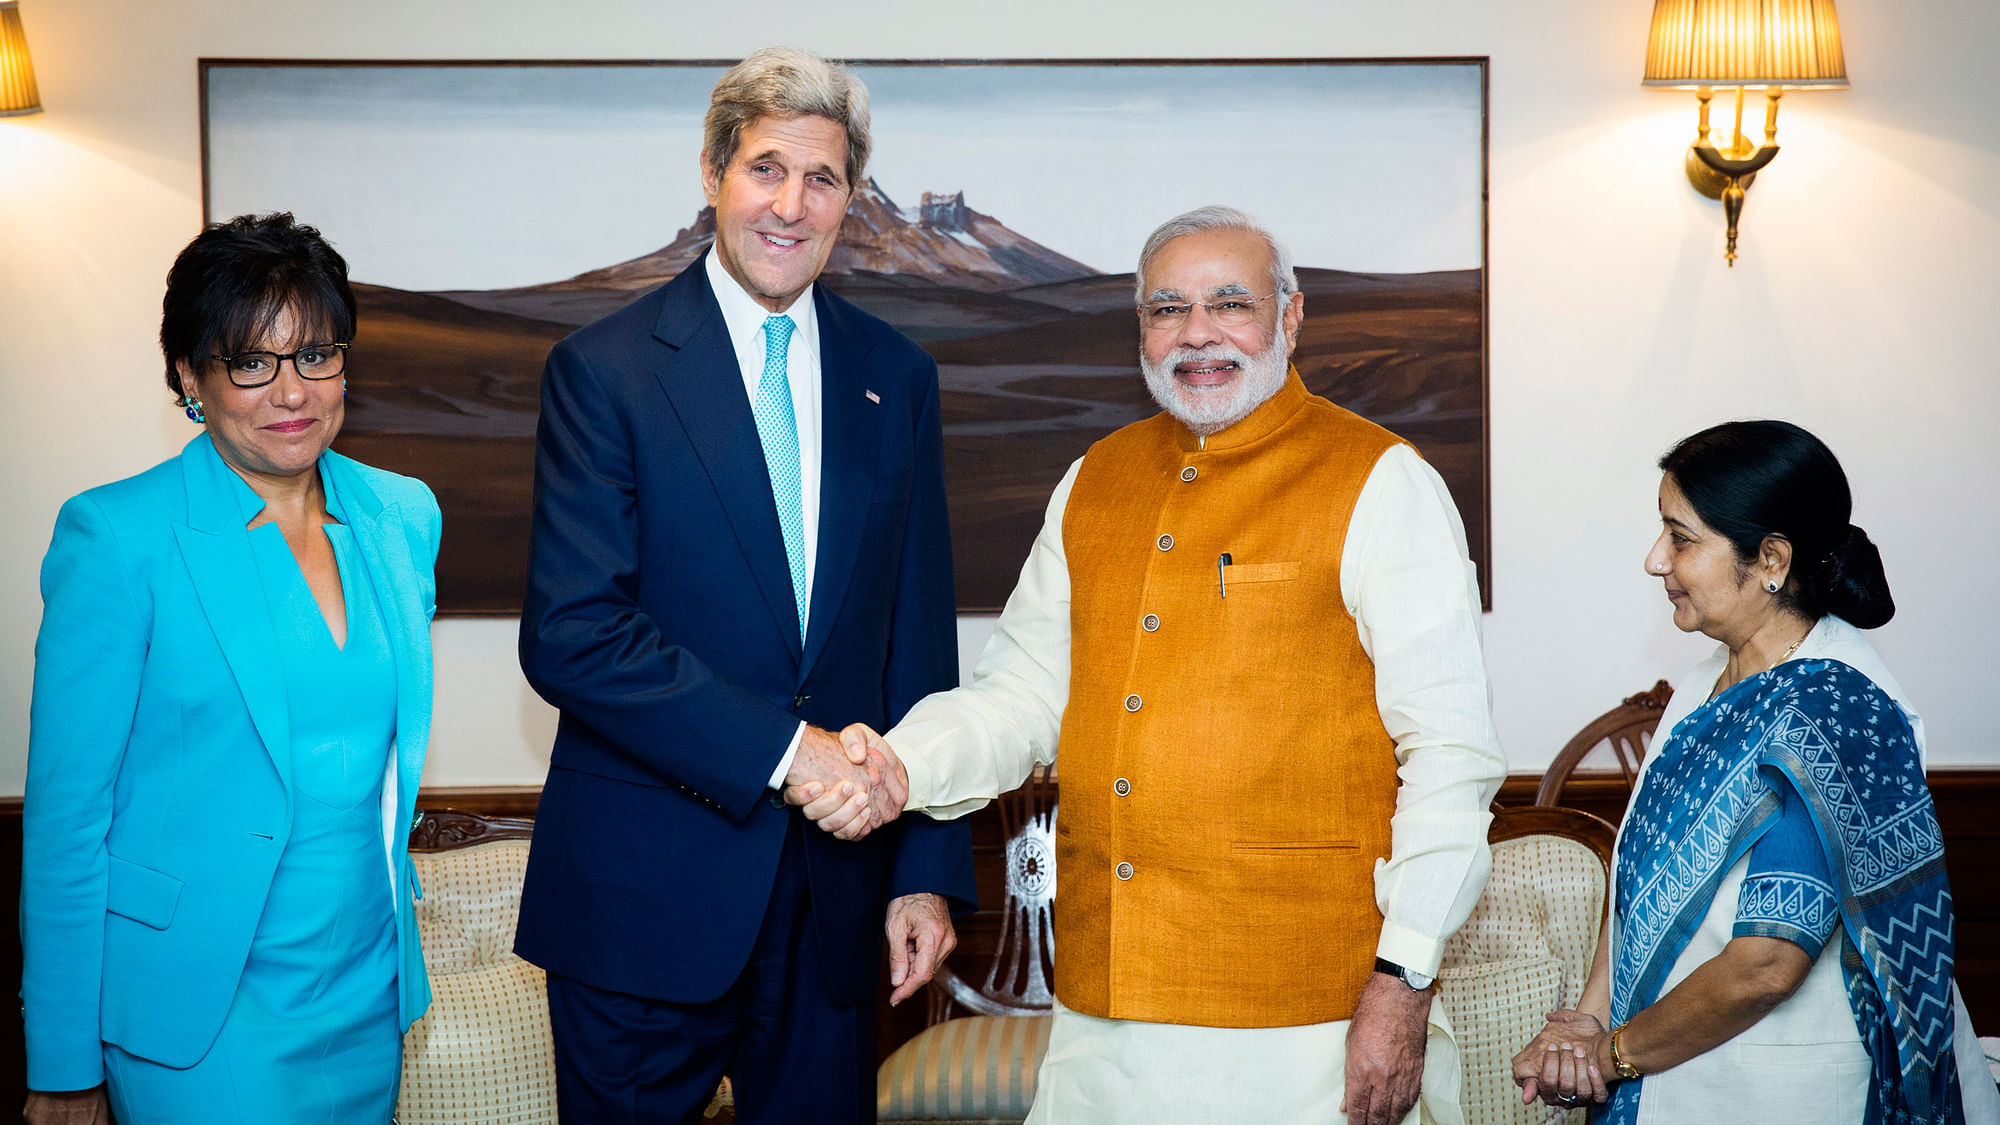 US Secretary of State John Kerry and PM Narendra Modi shake hands, flanked by US Secretary of Commerce Penny Pritzker and External Affairs Minister Sushma Swaraj. (Photo: Reuters)